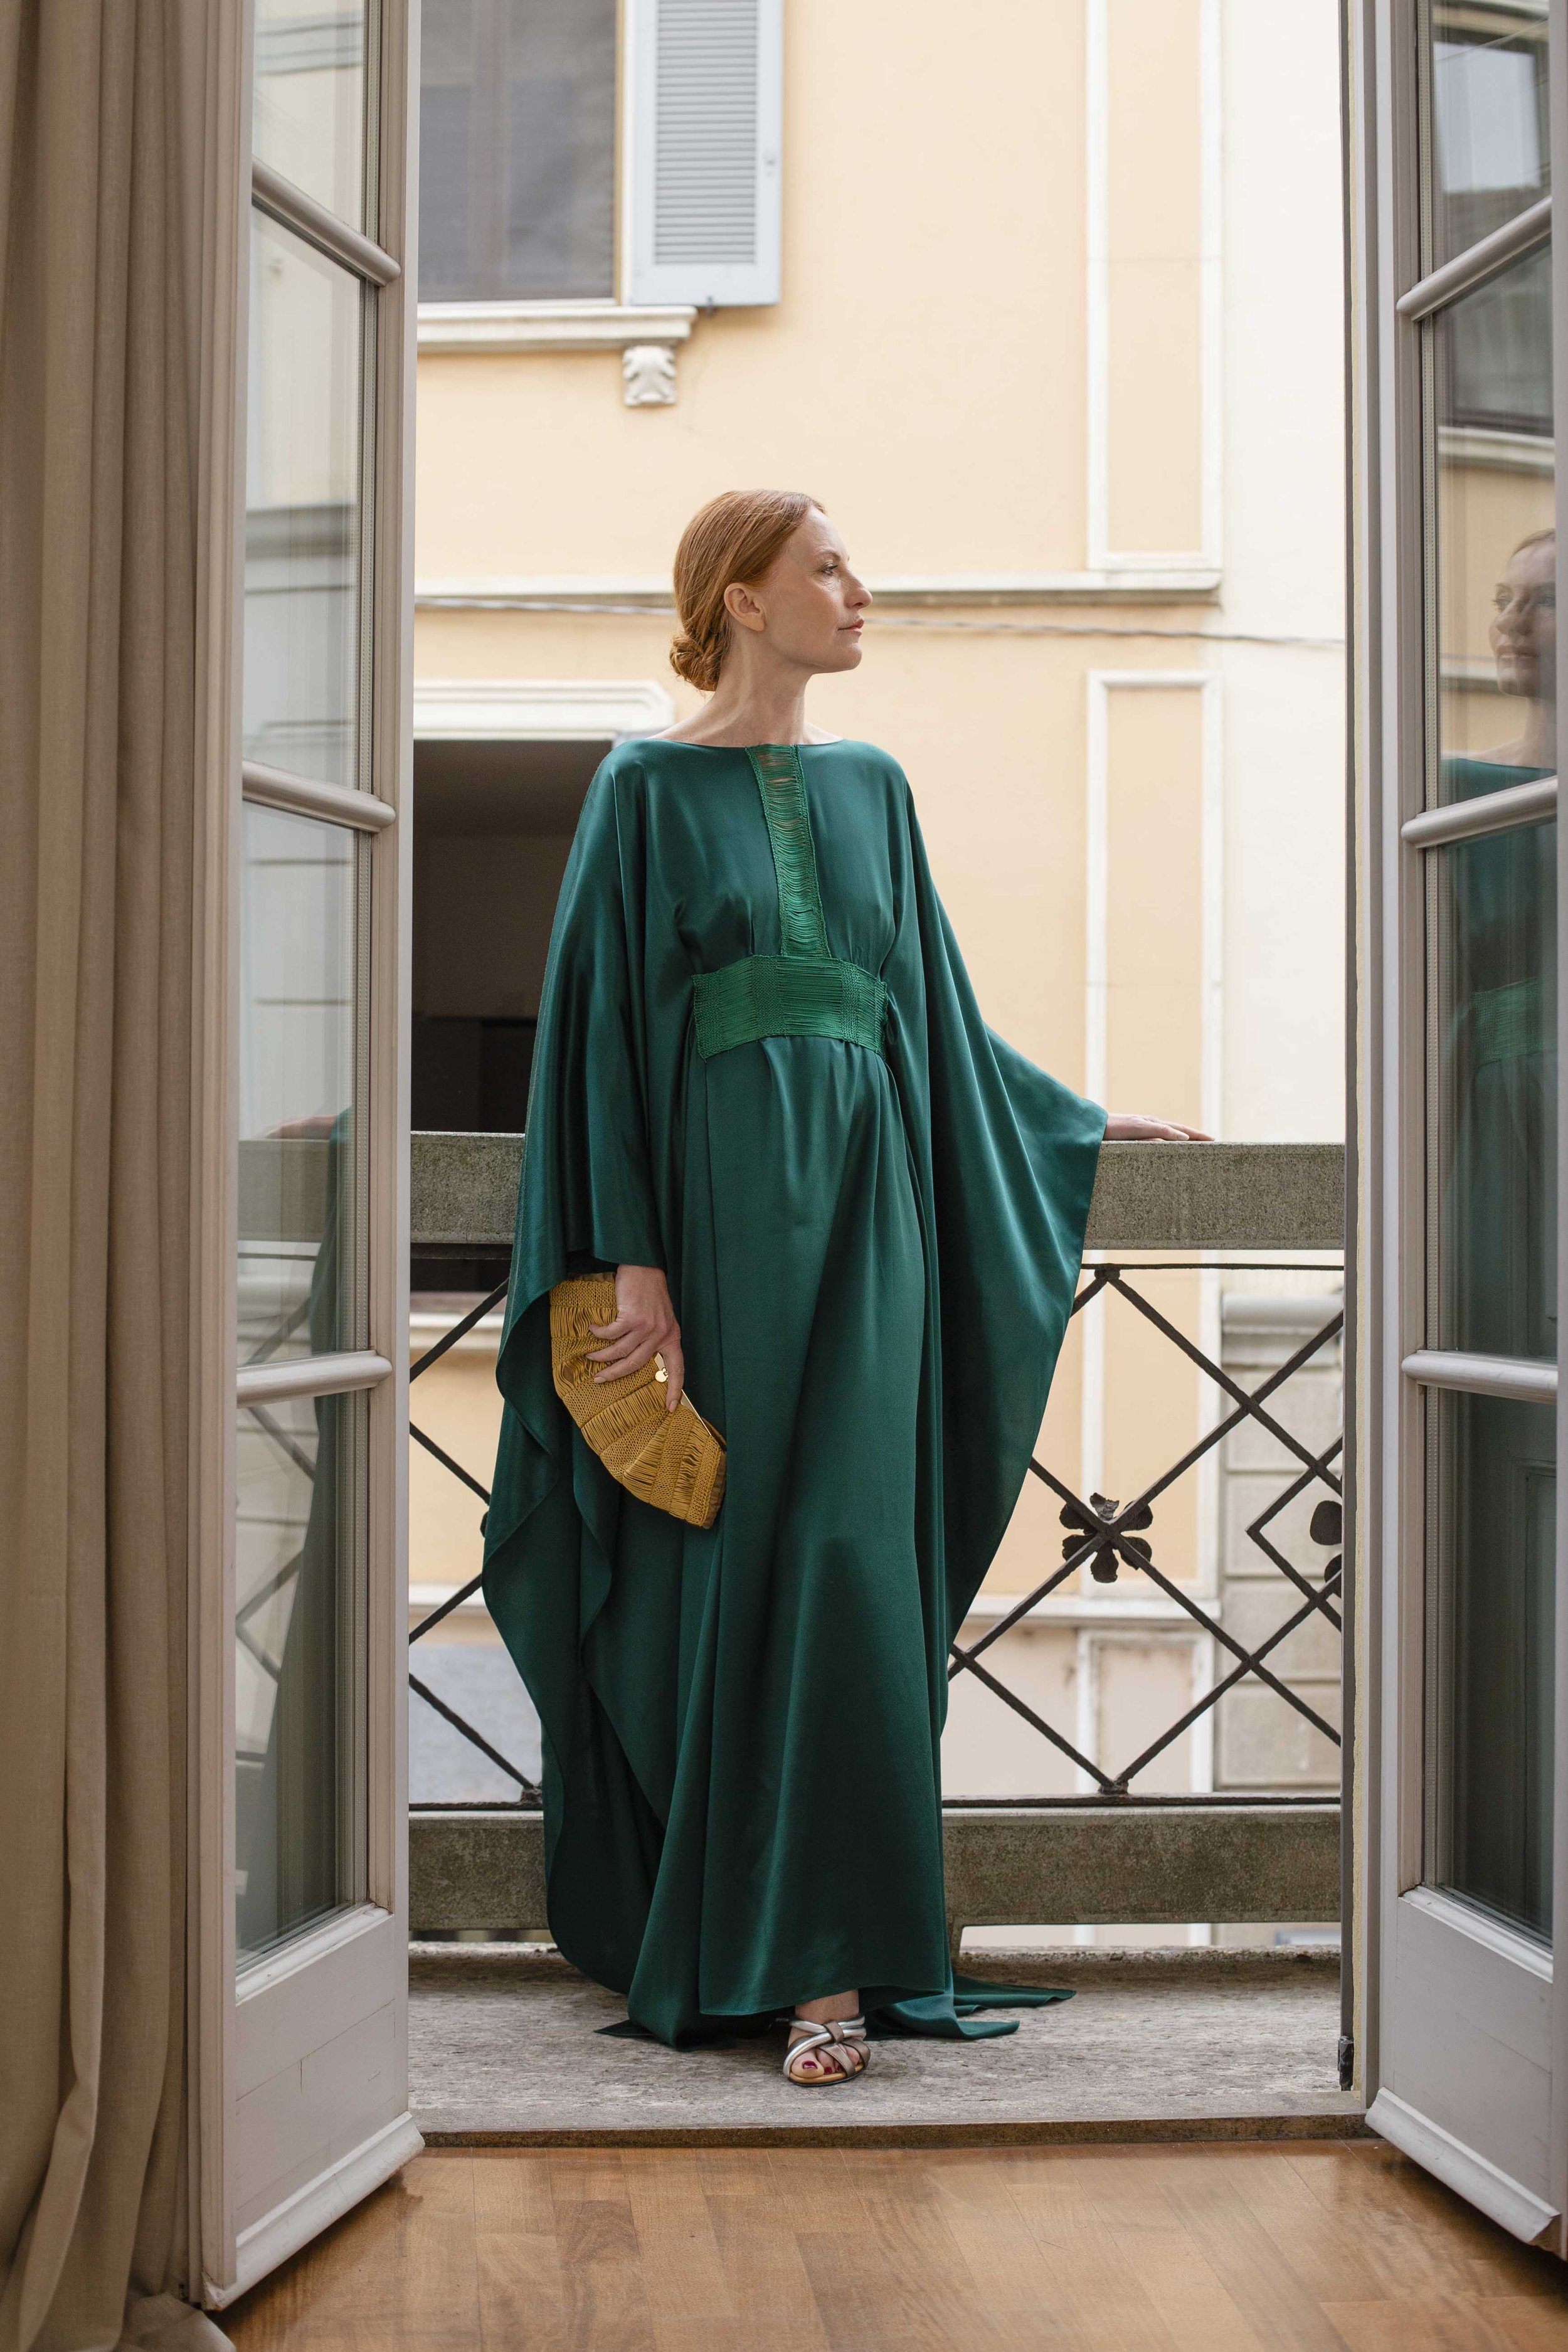 MOD23 Green Gown with Purse.jpg